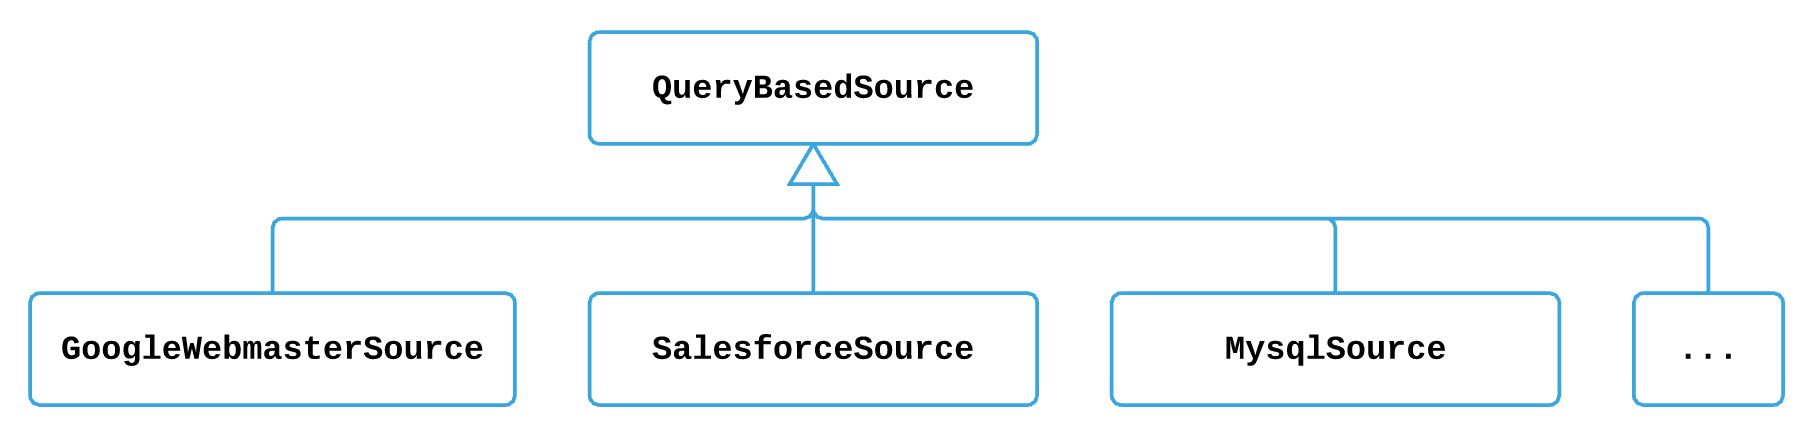 Query based sources